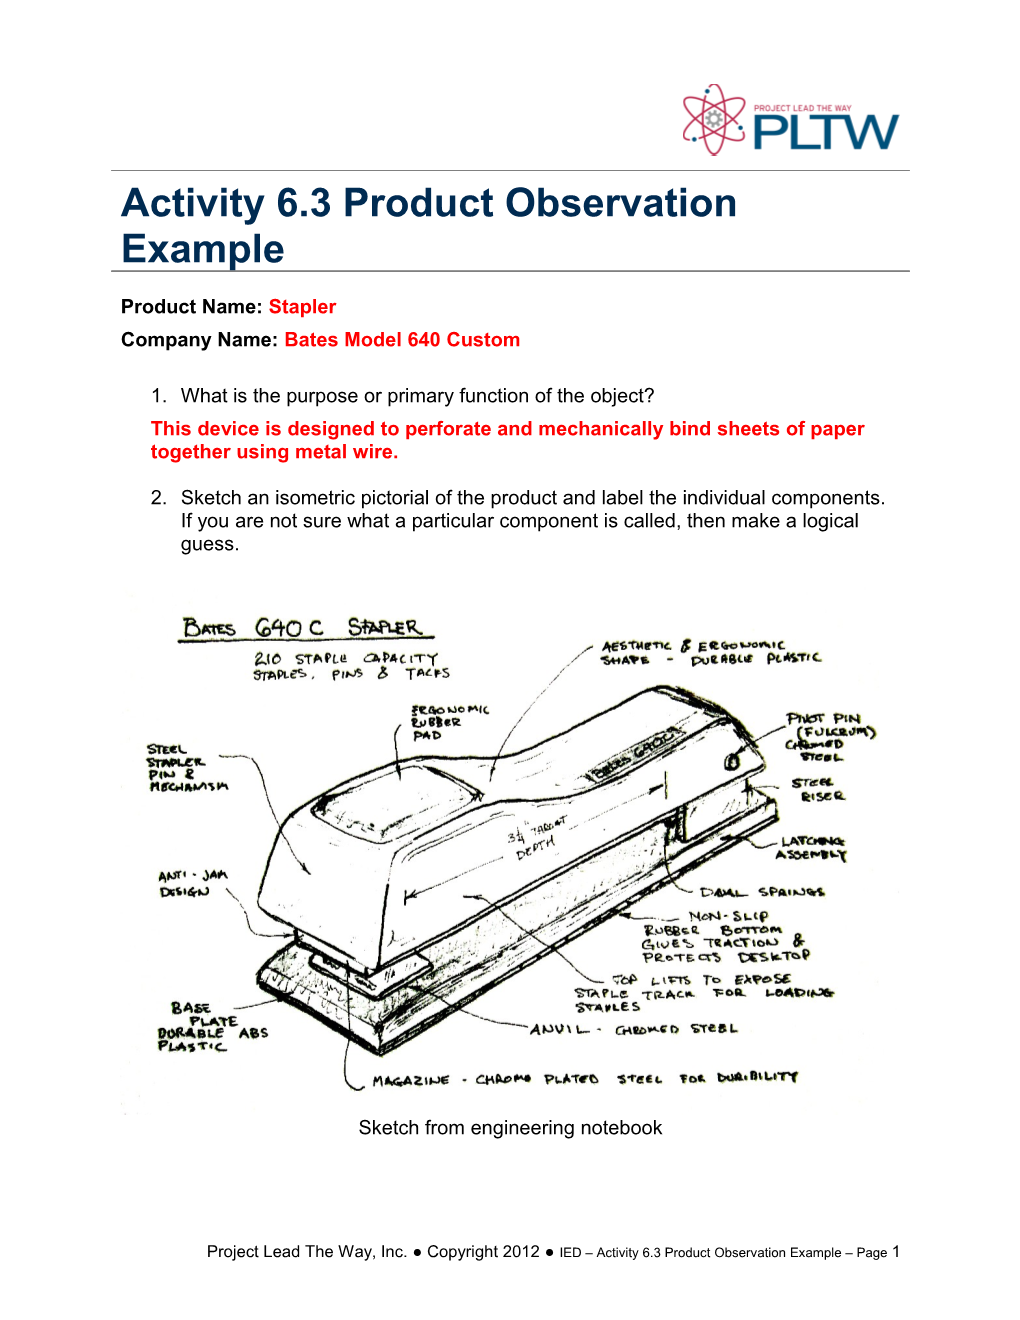 Activity 6.3 Product Observation Example